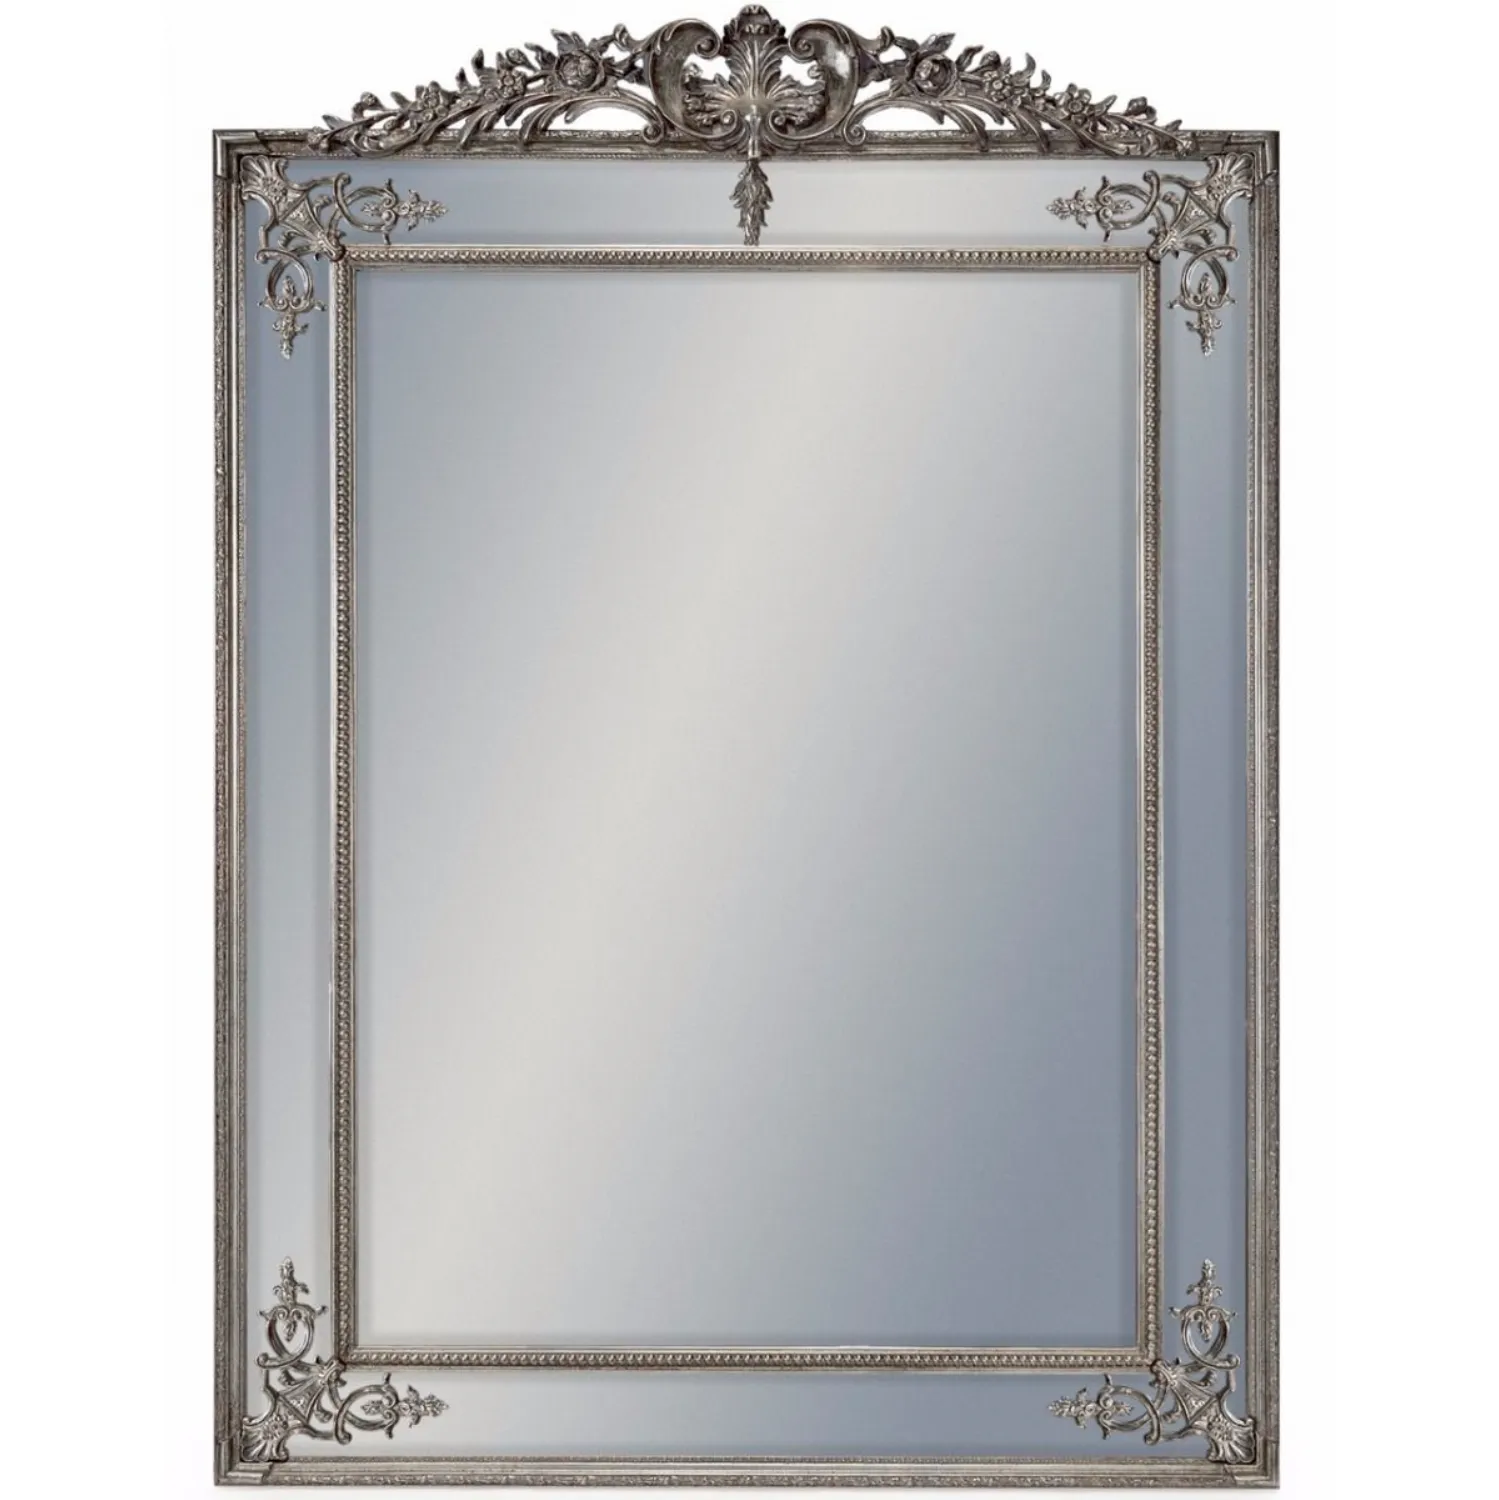 Silver Ornate Rectangular Wall Mirror with Crest Top